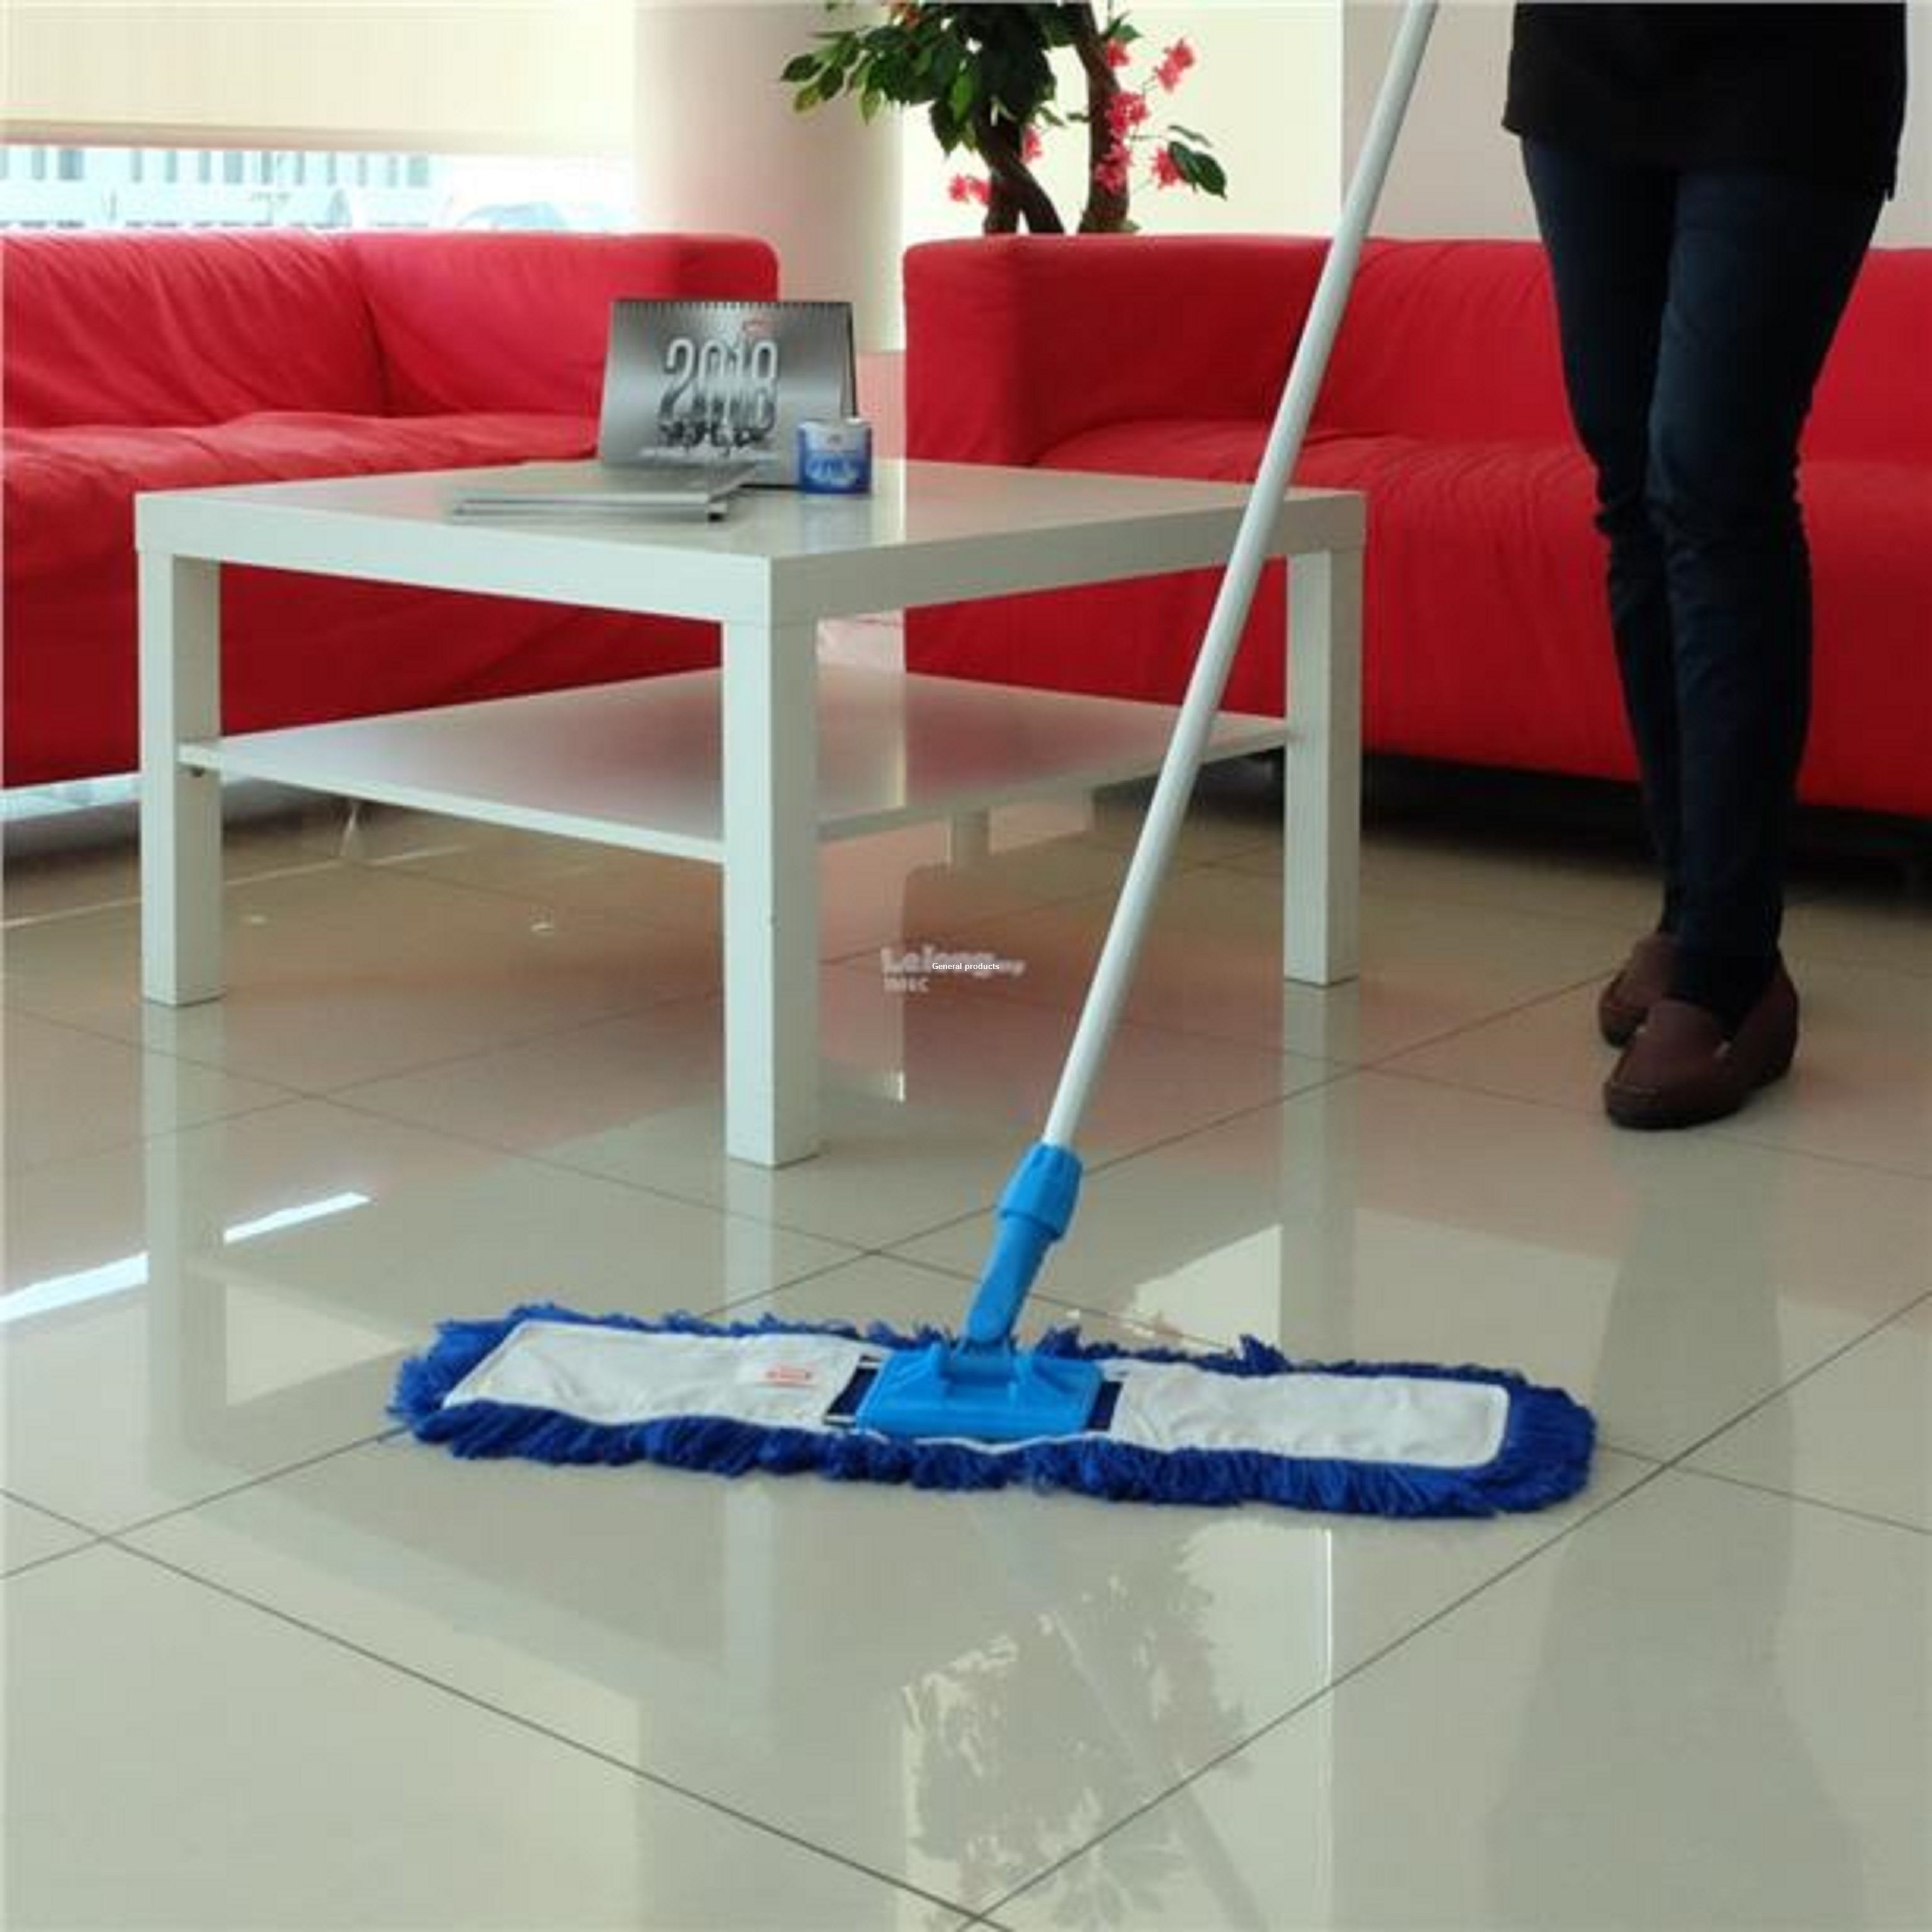 Cleaning Accessories - Dustcontrol